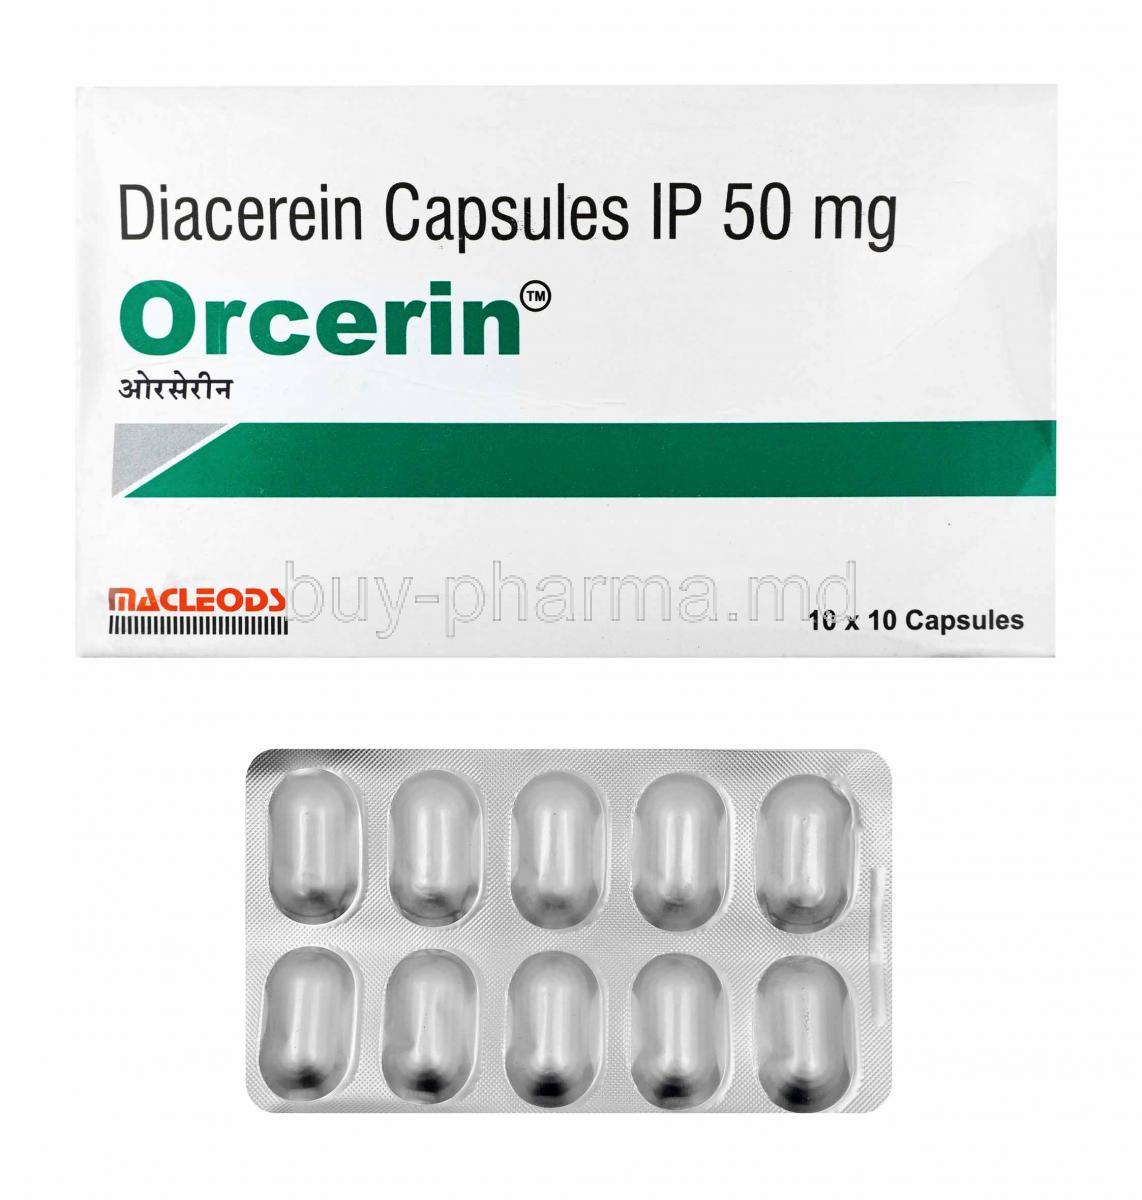 Orcerin, Diacerein box and capsules